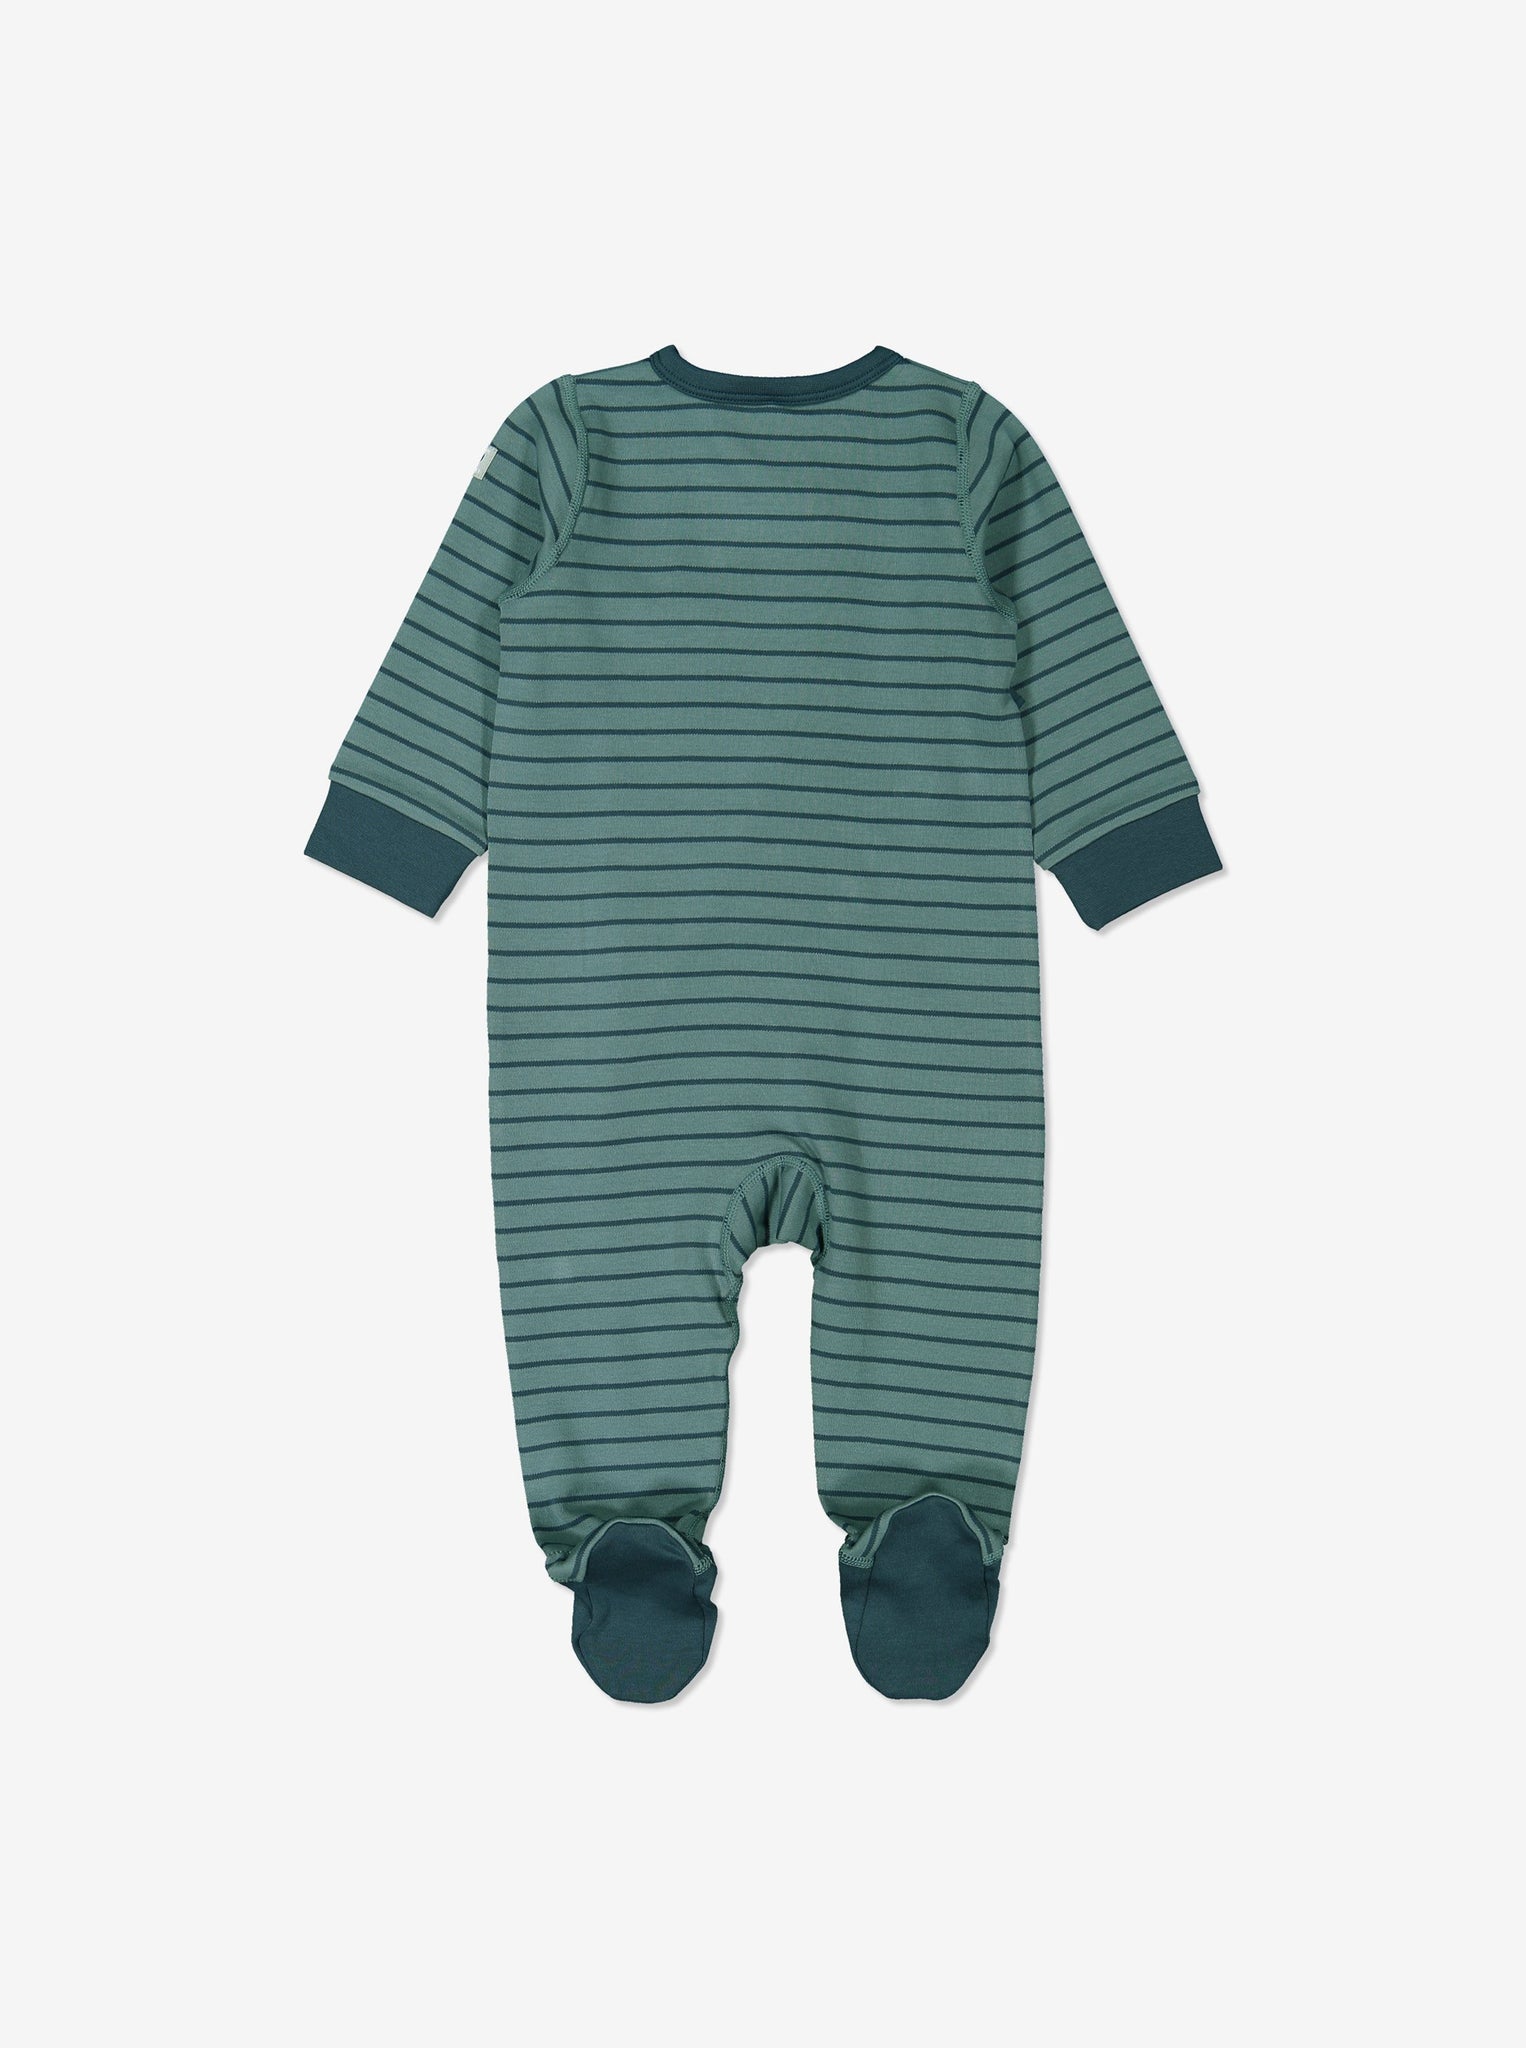 Cute Baby All In One, Unisex Baby Clothes| Polarn O. Pyret UK